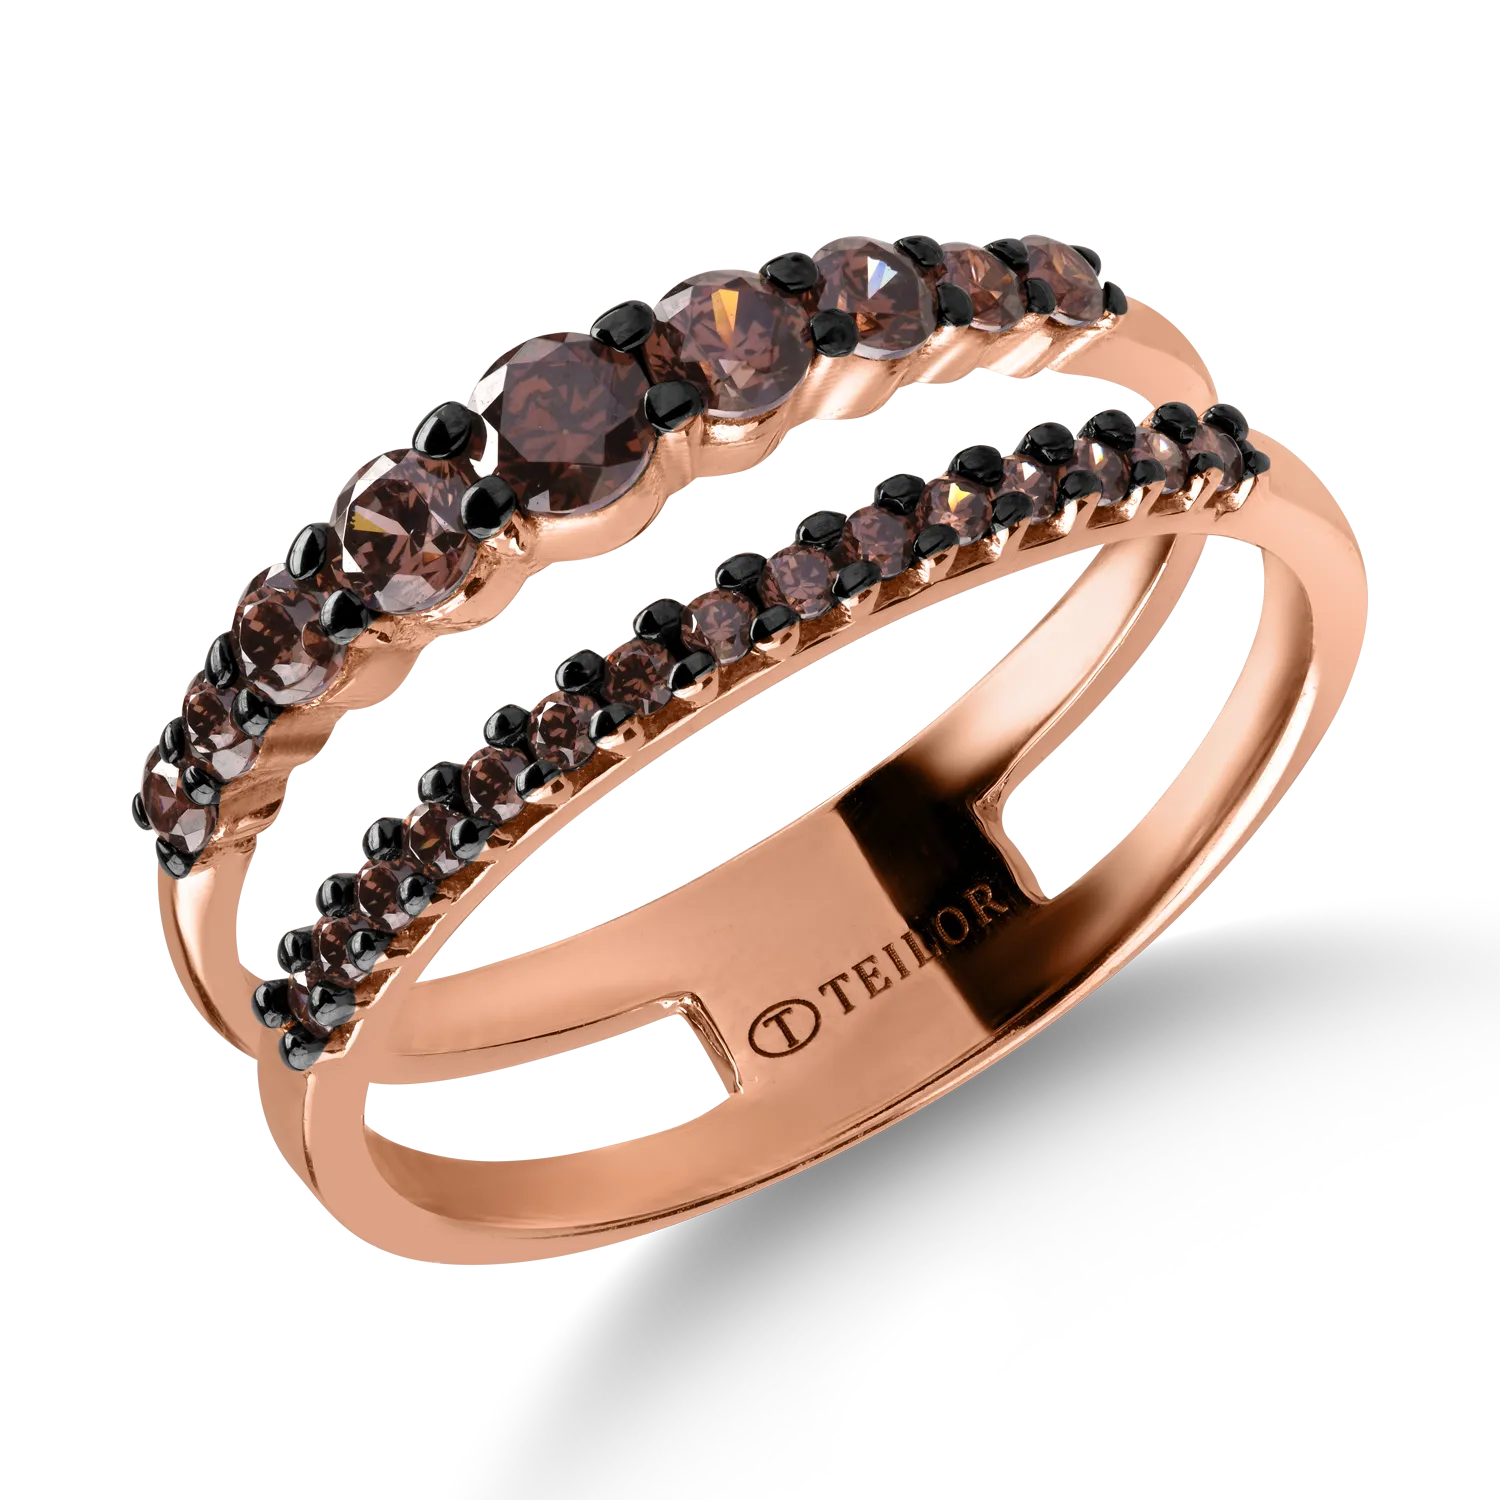 Rose gold ring with microsetting zirconia